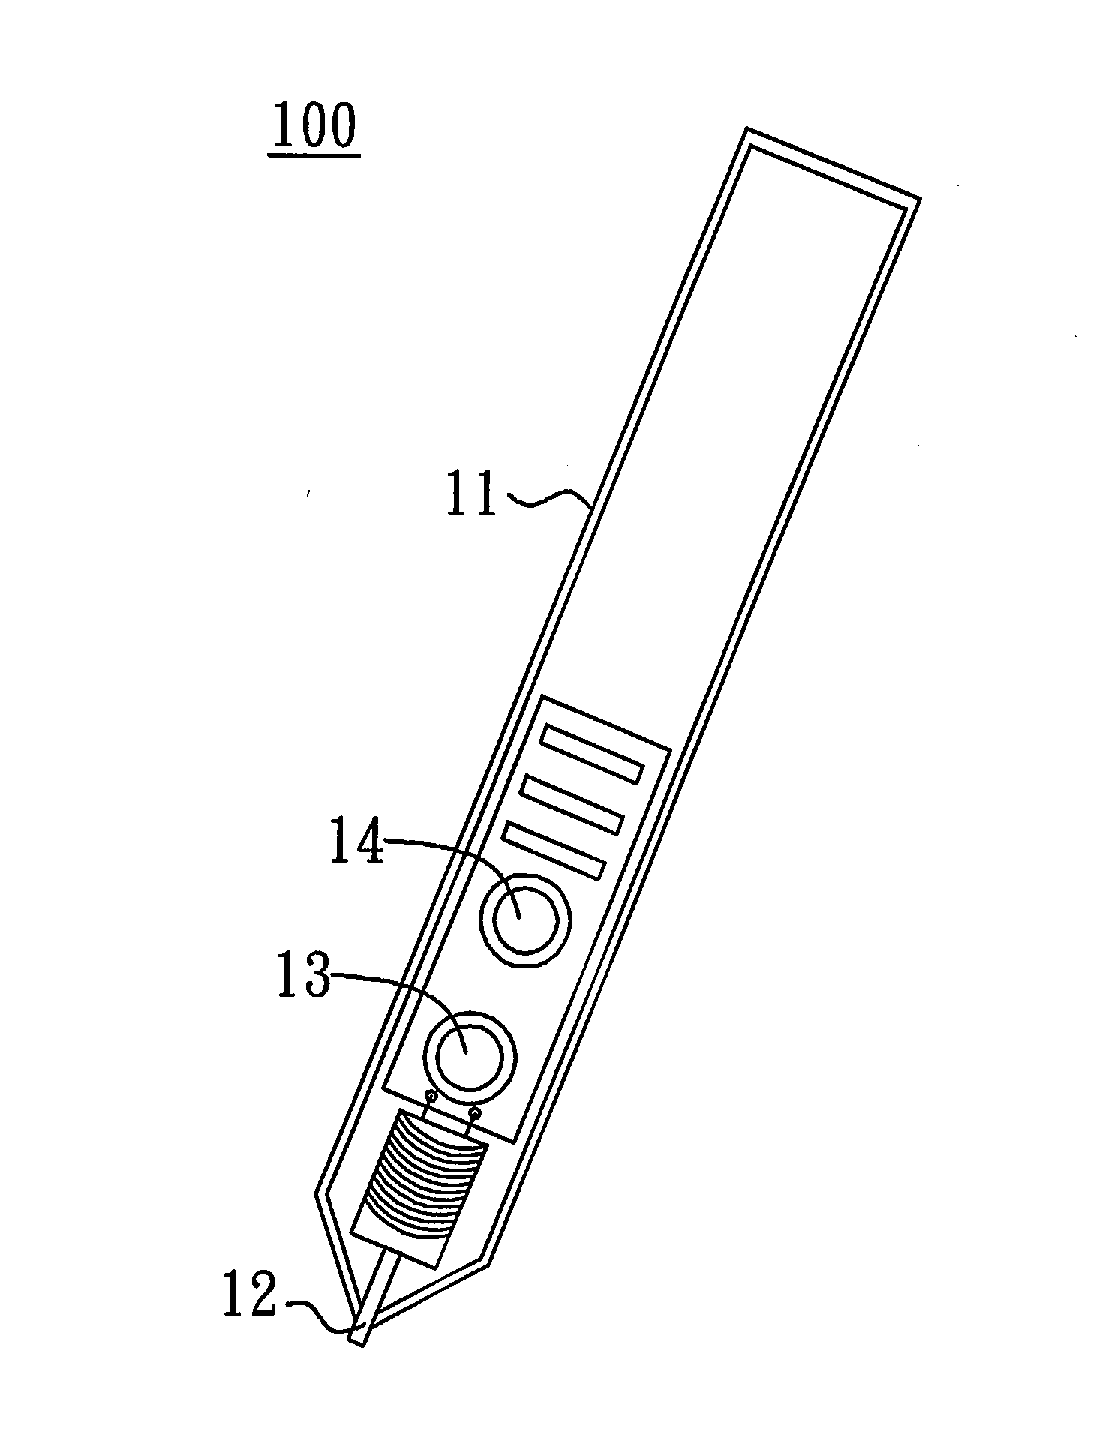 Stylus without active components and an associated touch panel